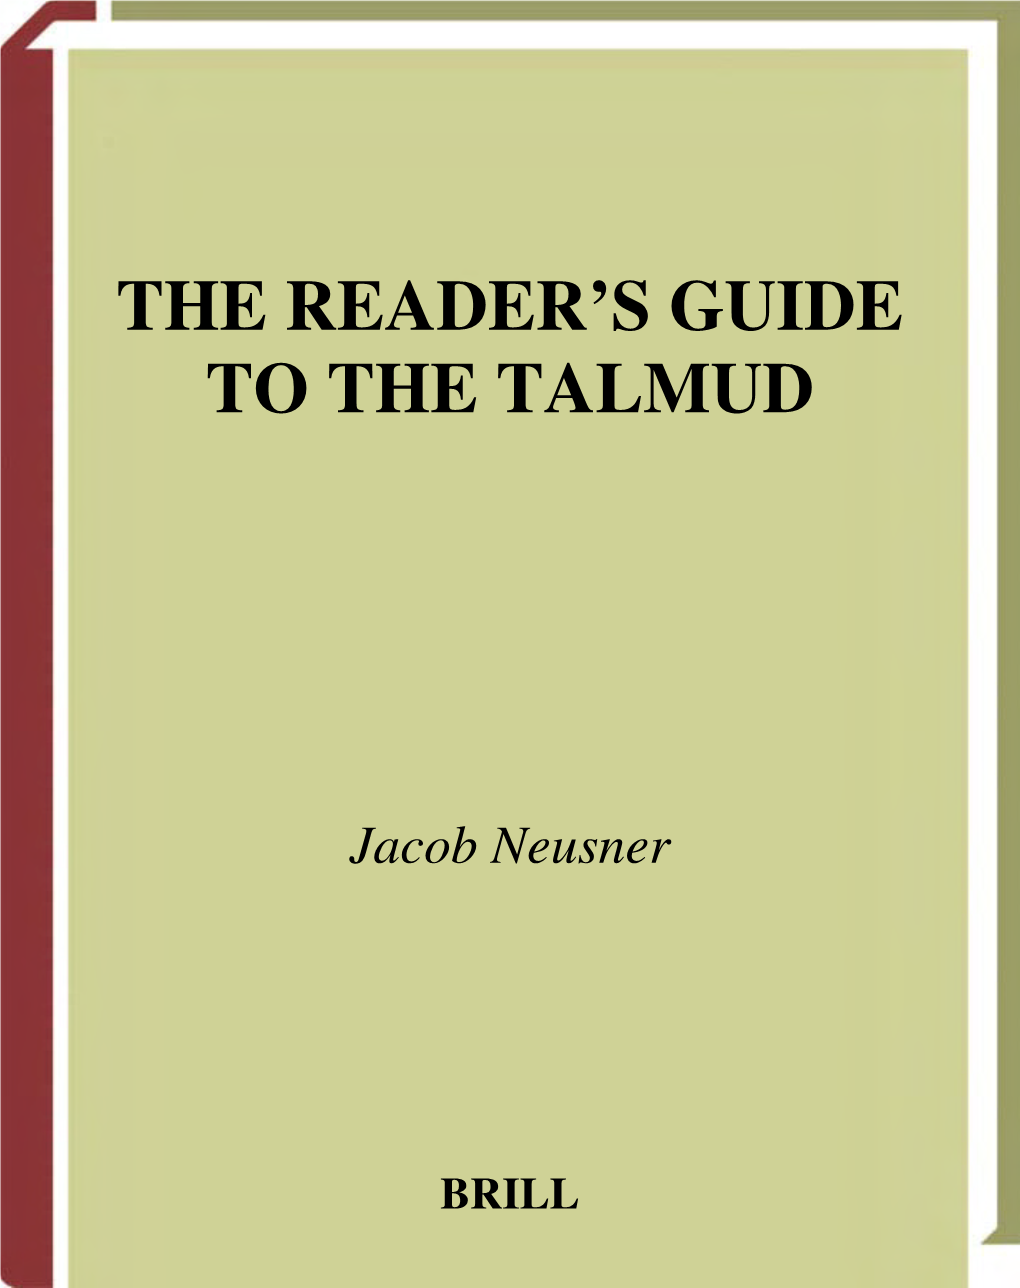 The Reader's Guide to the Talmud